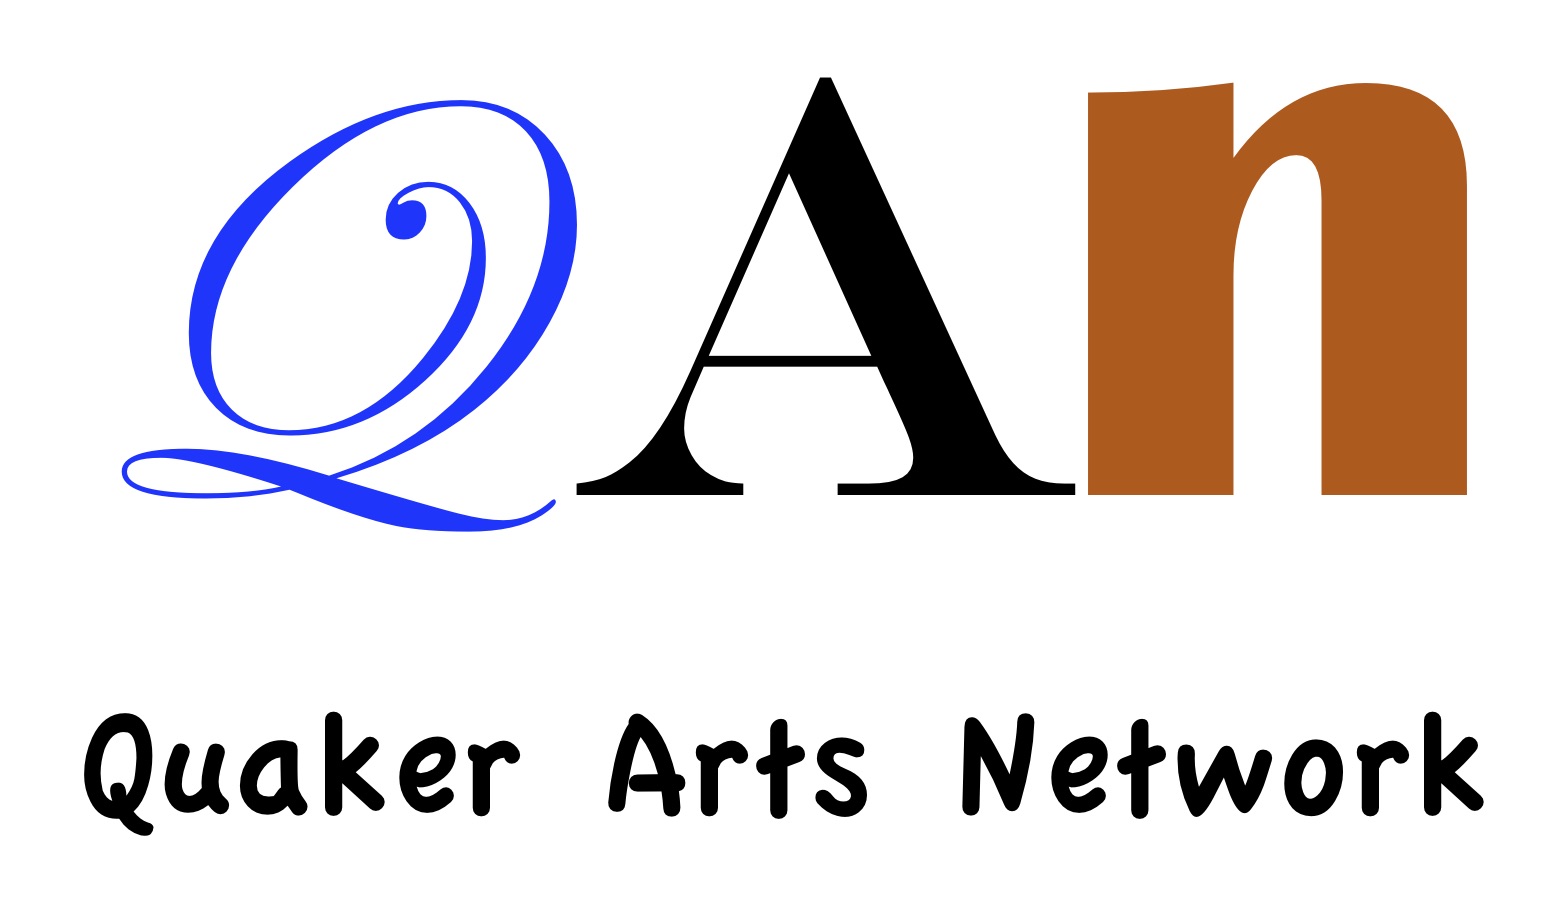 An evening of Quaker Arts by Zoom - Quaker Arts Network